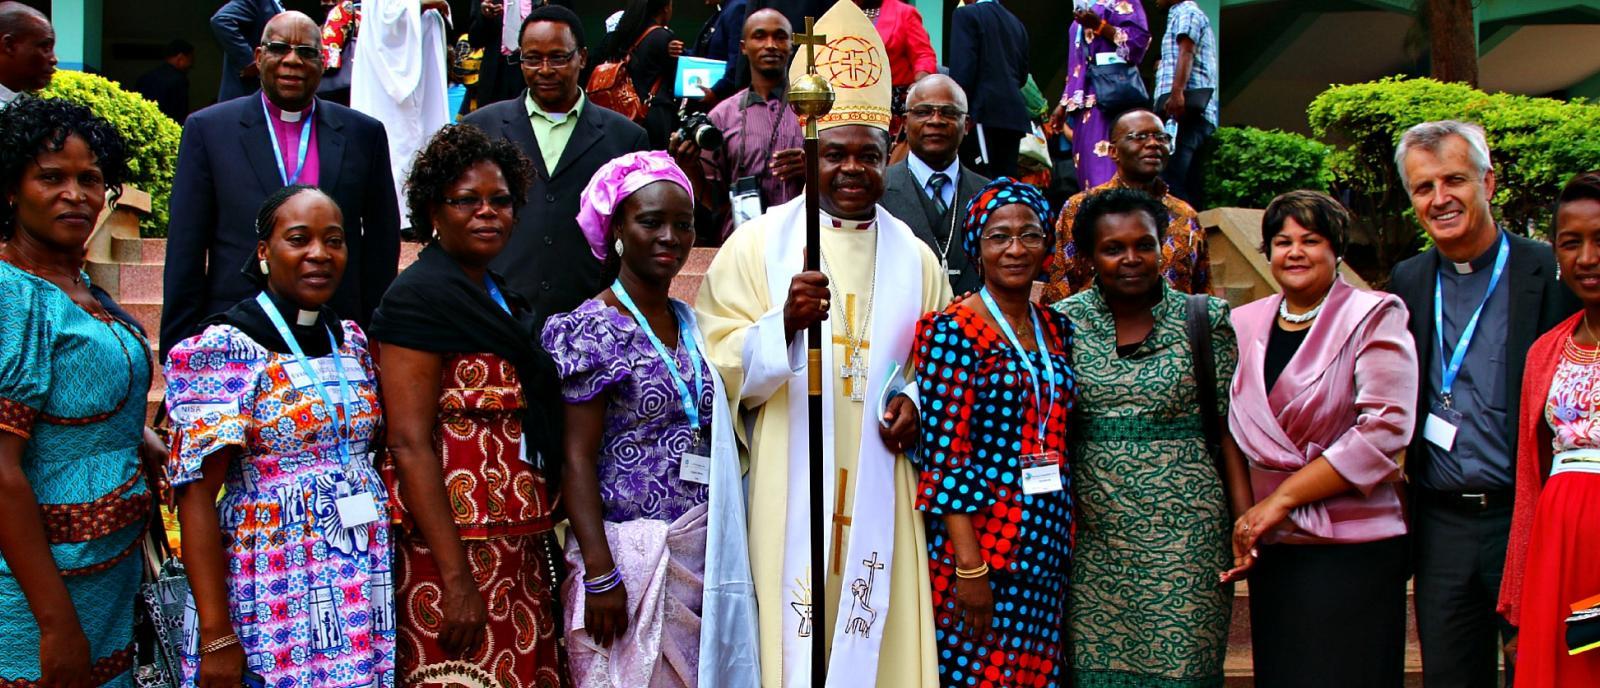 Bishop Malasusa, centre, with members of the LWF Council